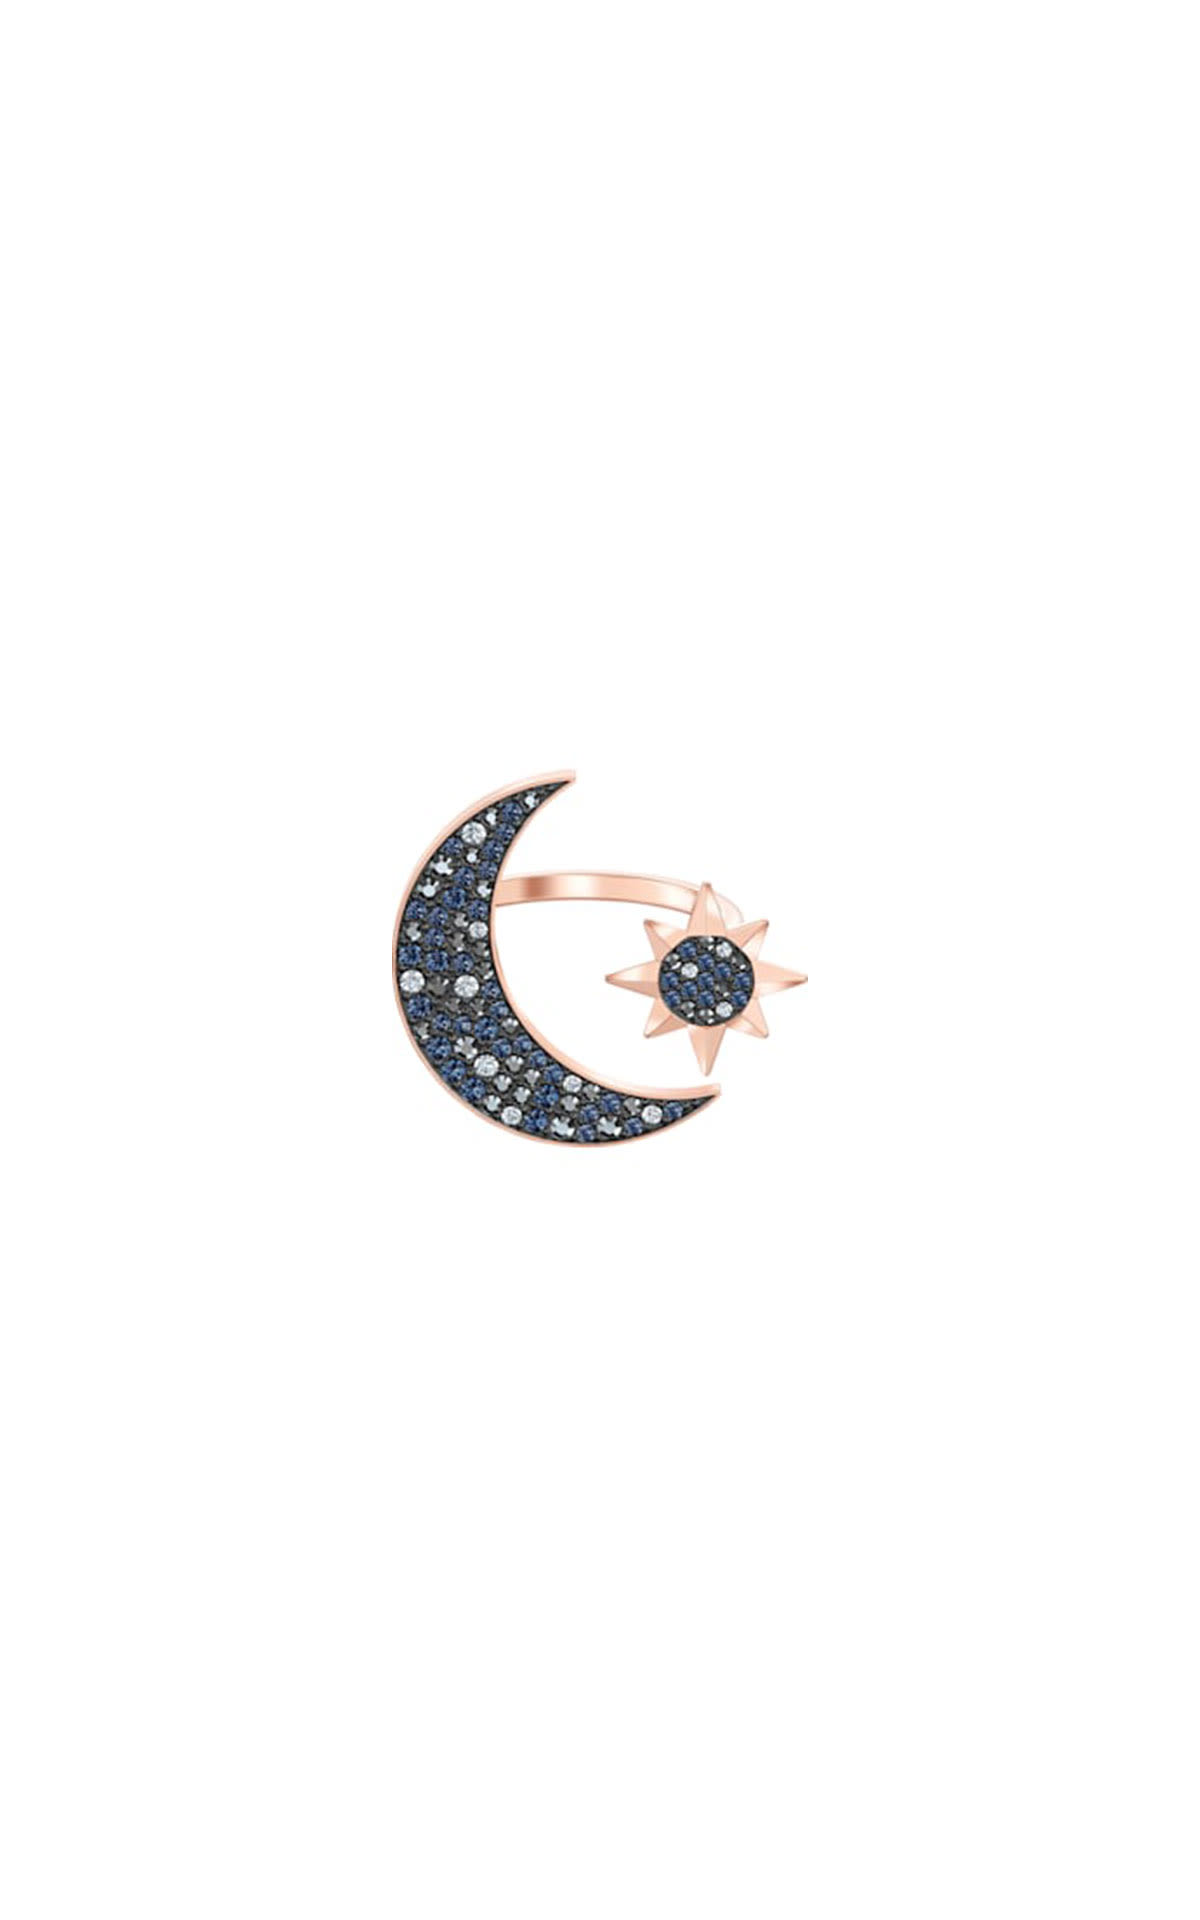 Swarovski Moon rose gold plated ring from Bicester Village